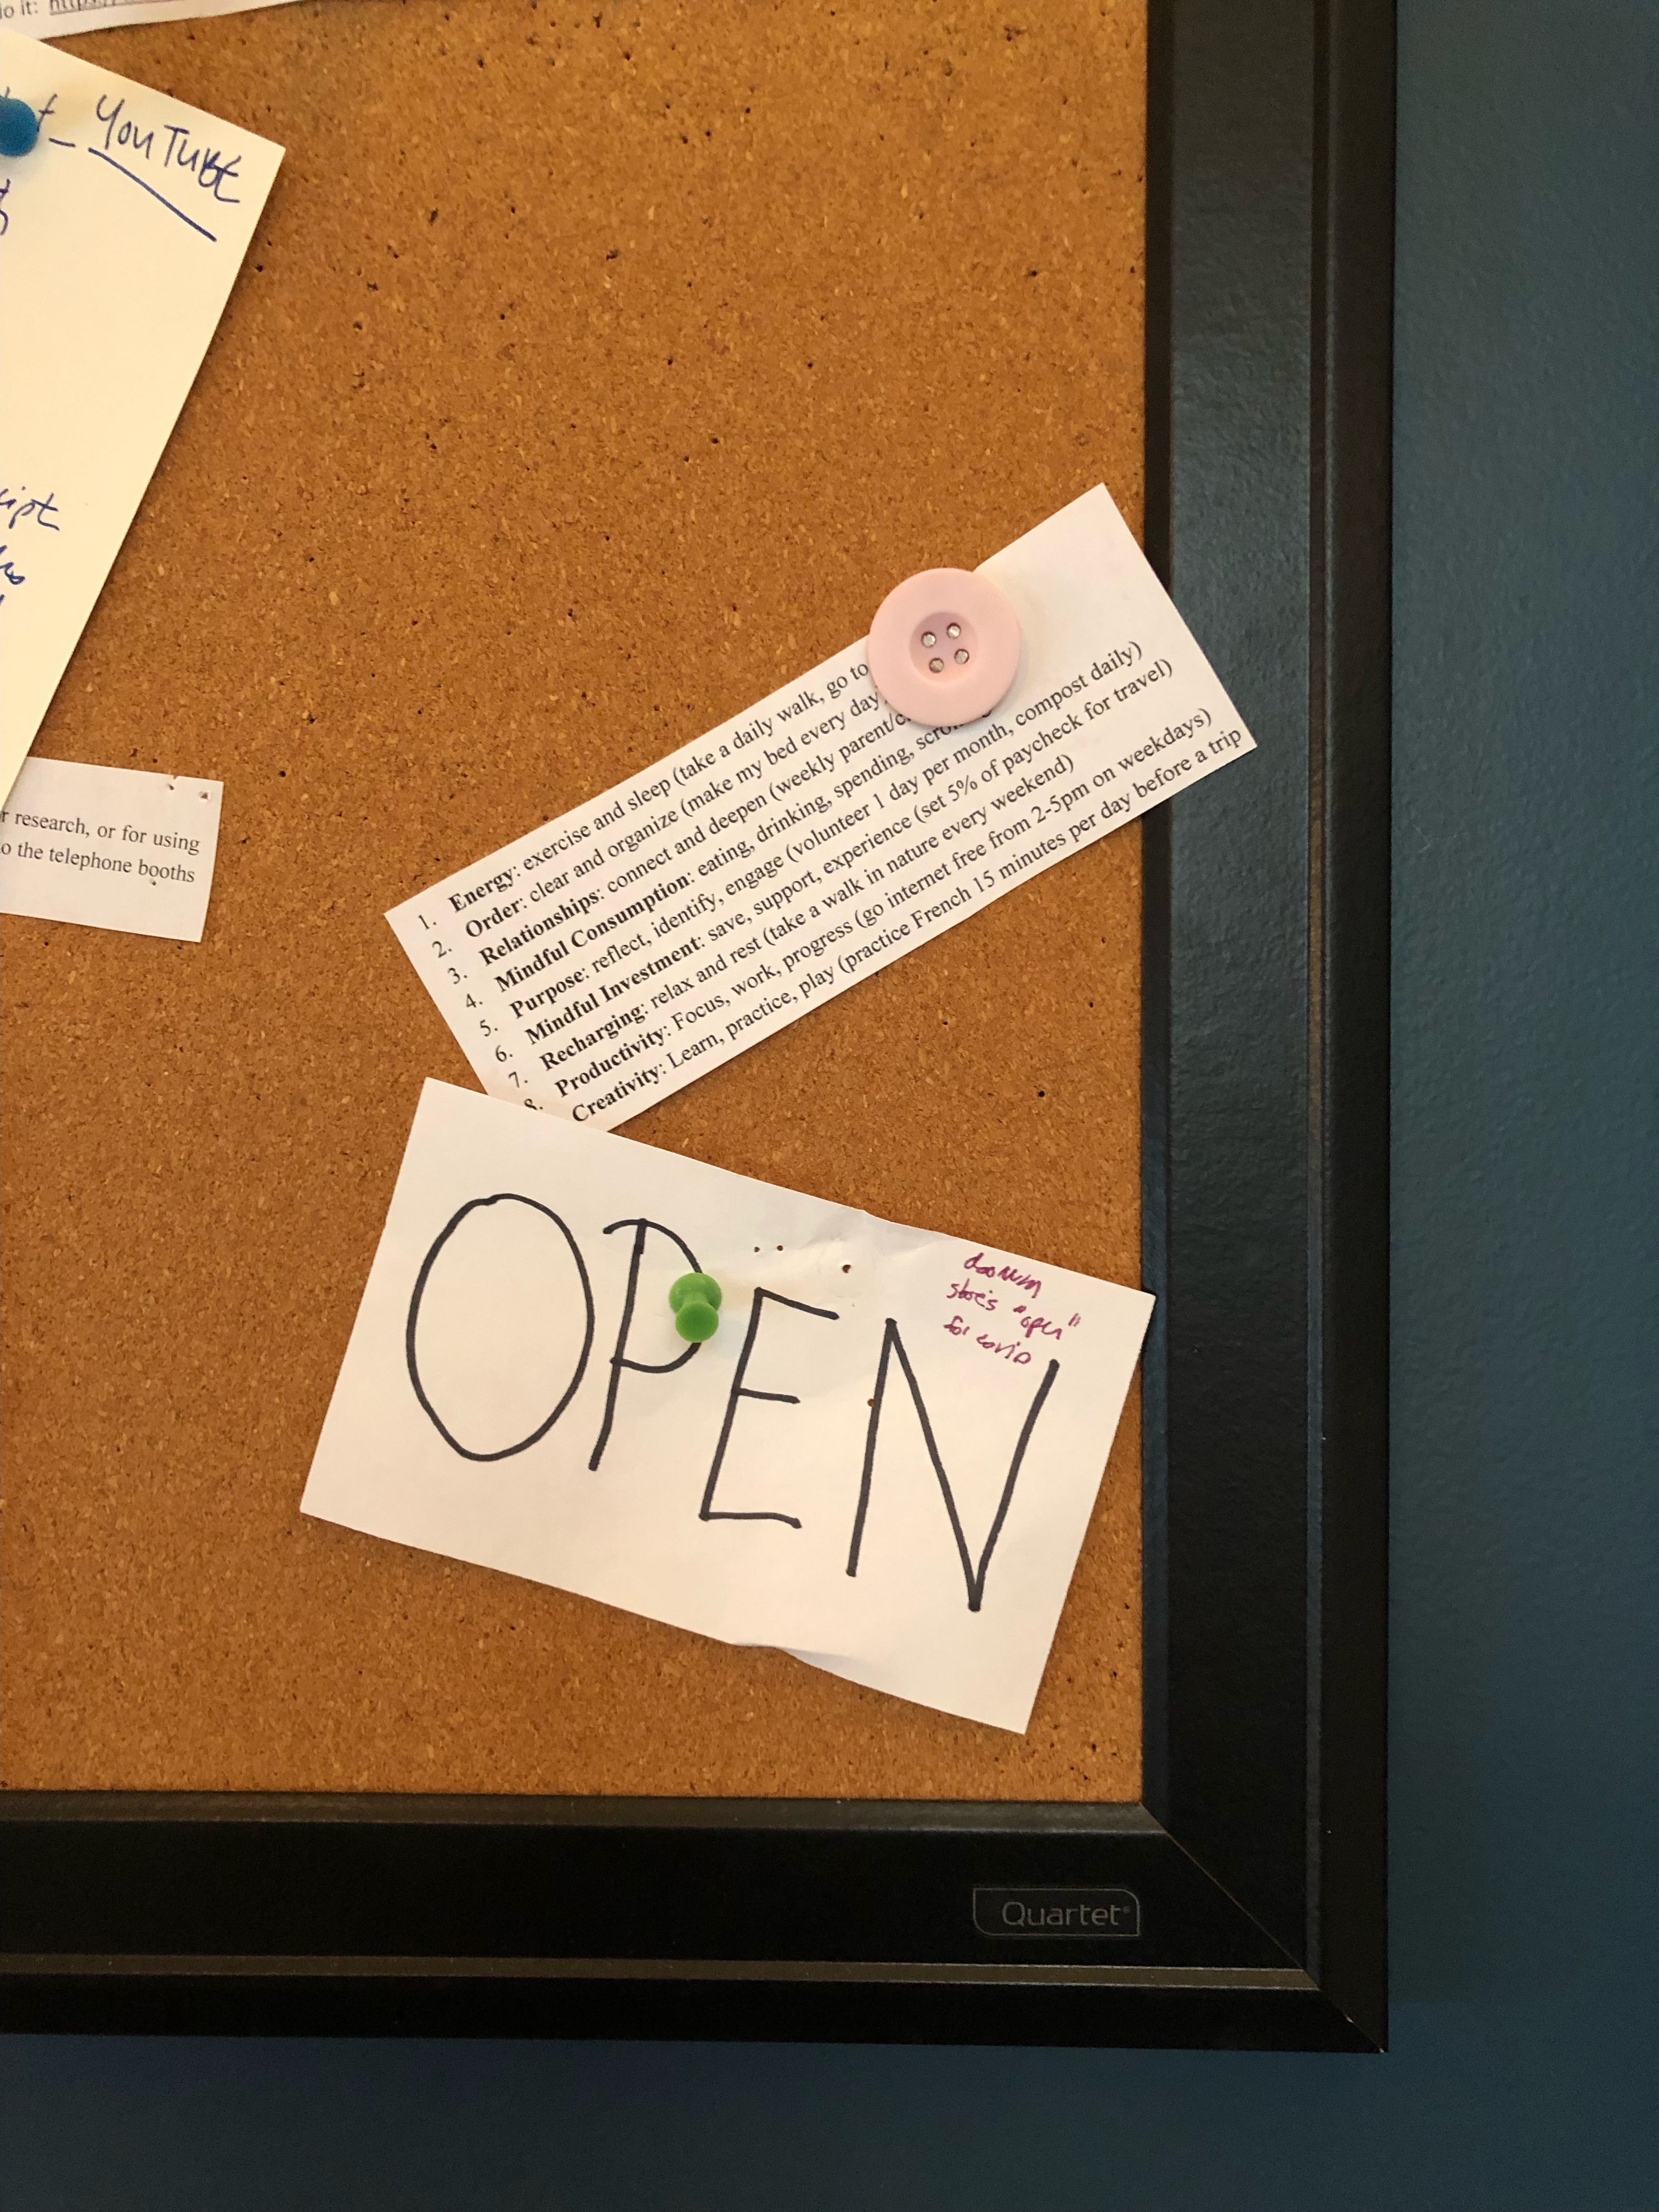 Gretchen's cork board with the word "open" on an index card